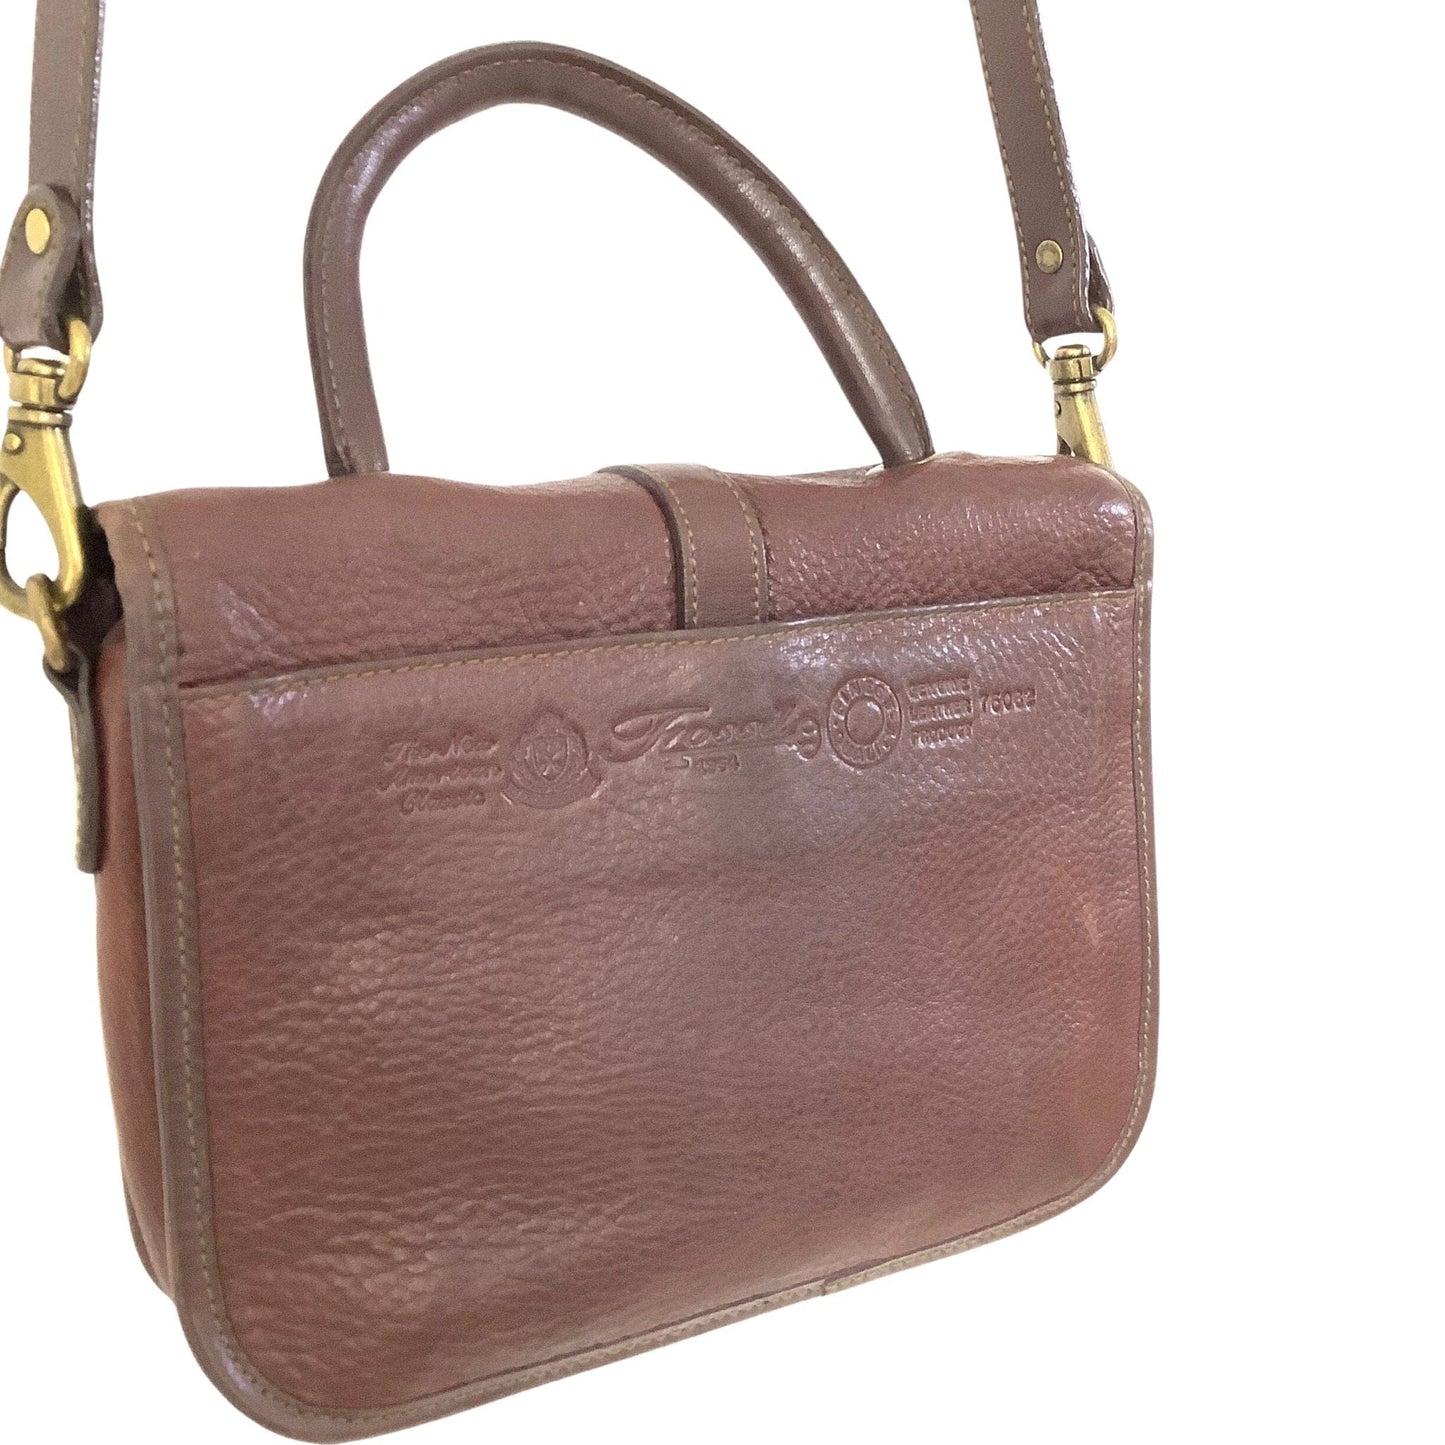 Fossil Tan Leather Bag Tan / Leather / Vintage 1980s